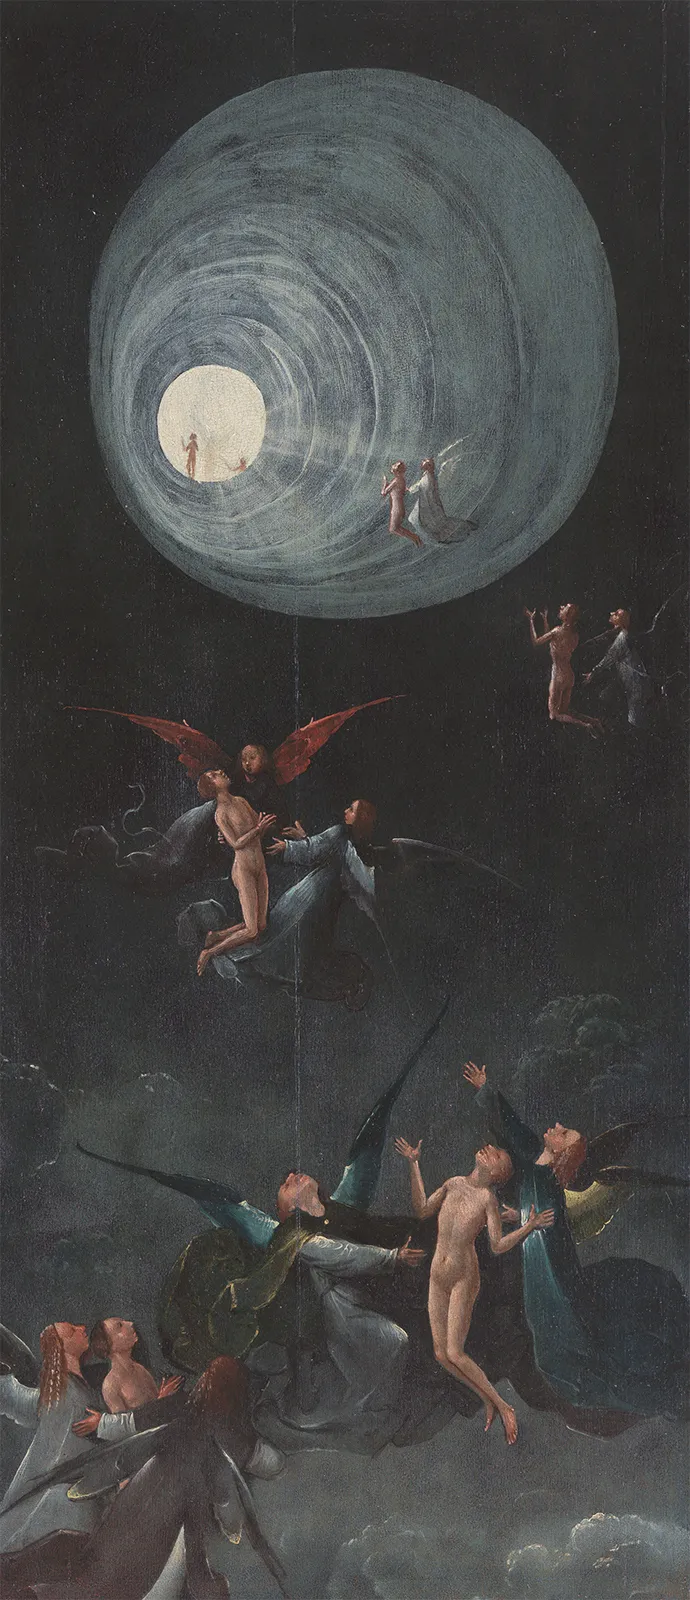 Hieronymus Bosch, Visions of the Hereafter: The Ascent of the Blessed, circa 1505–1515